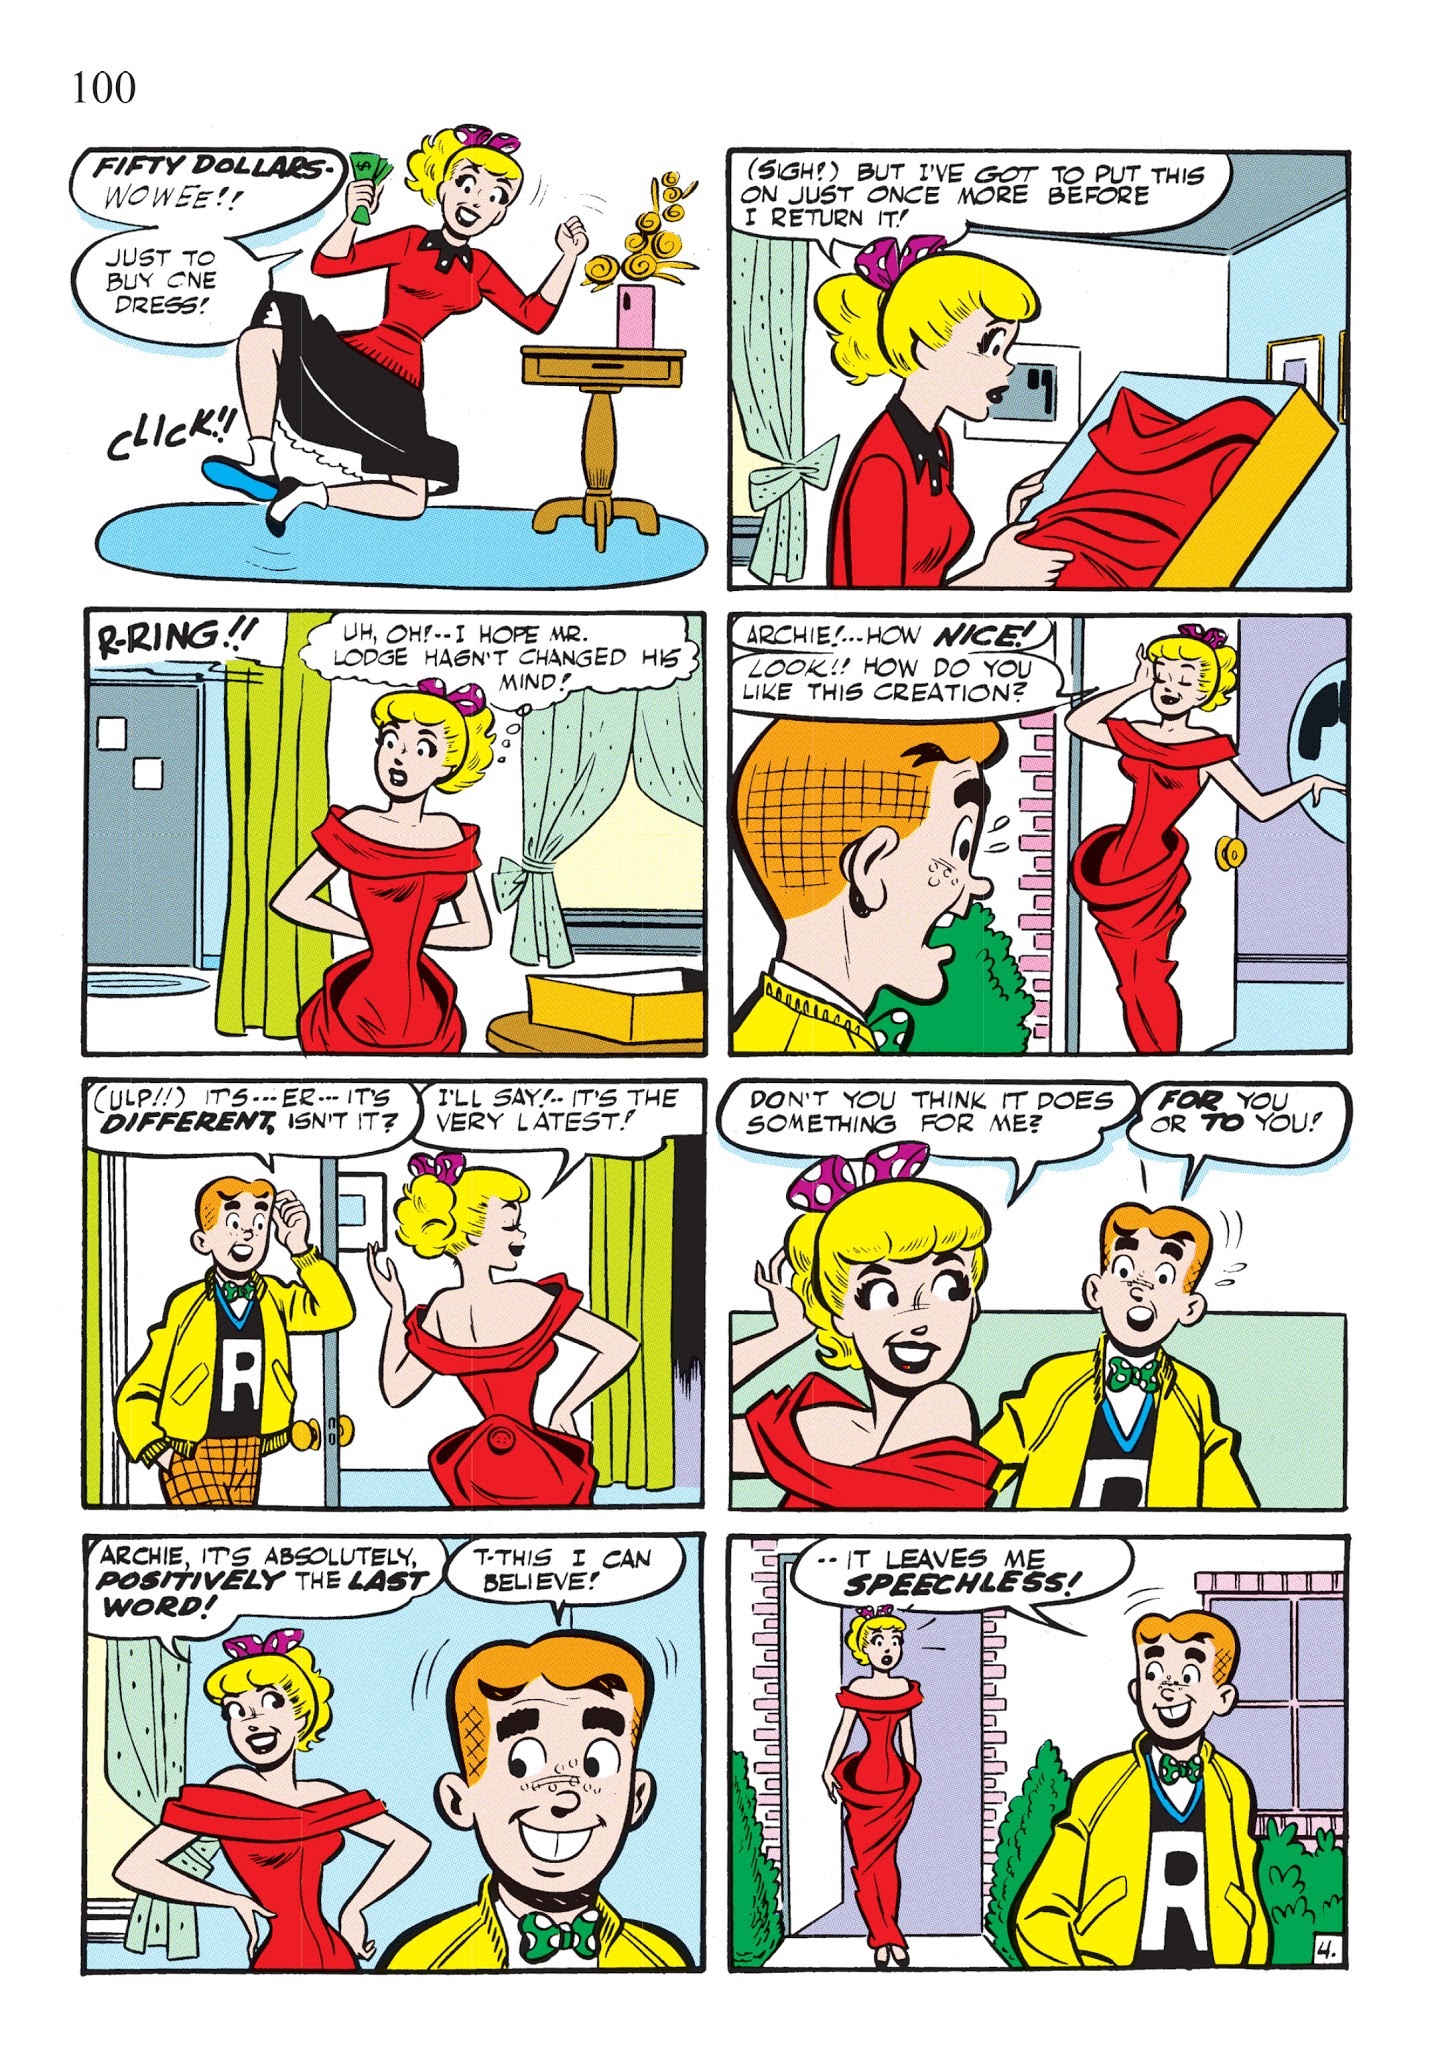 The Best Of Archie Comics Betty Veronica Tpb 1 Part 2 | Read The Best Of Archie  Comics Betty Veronica Tpb 1 Part 2 comic online in high quality. Read Full  Comic